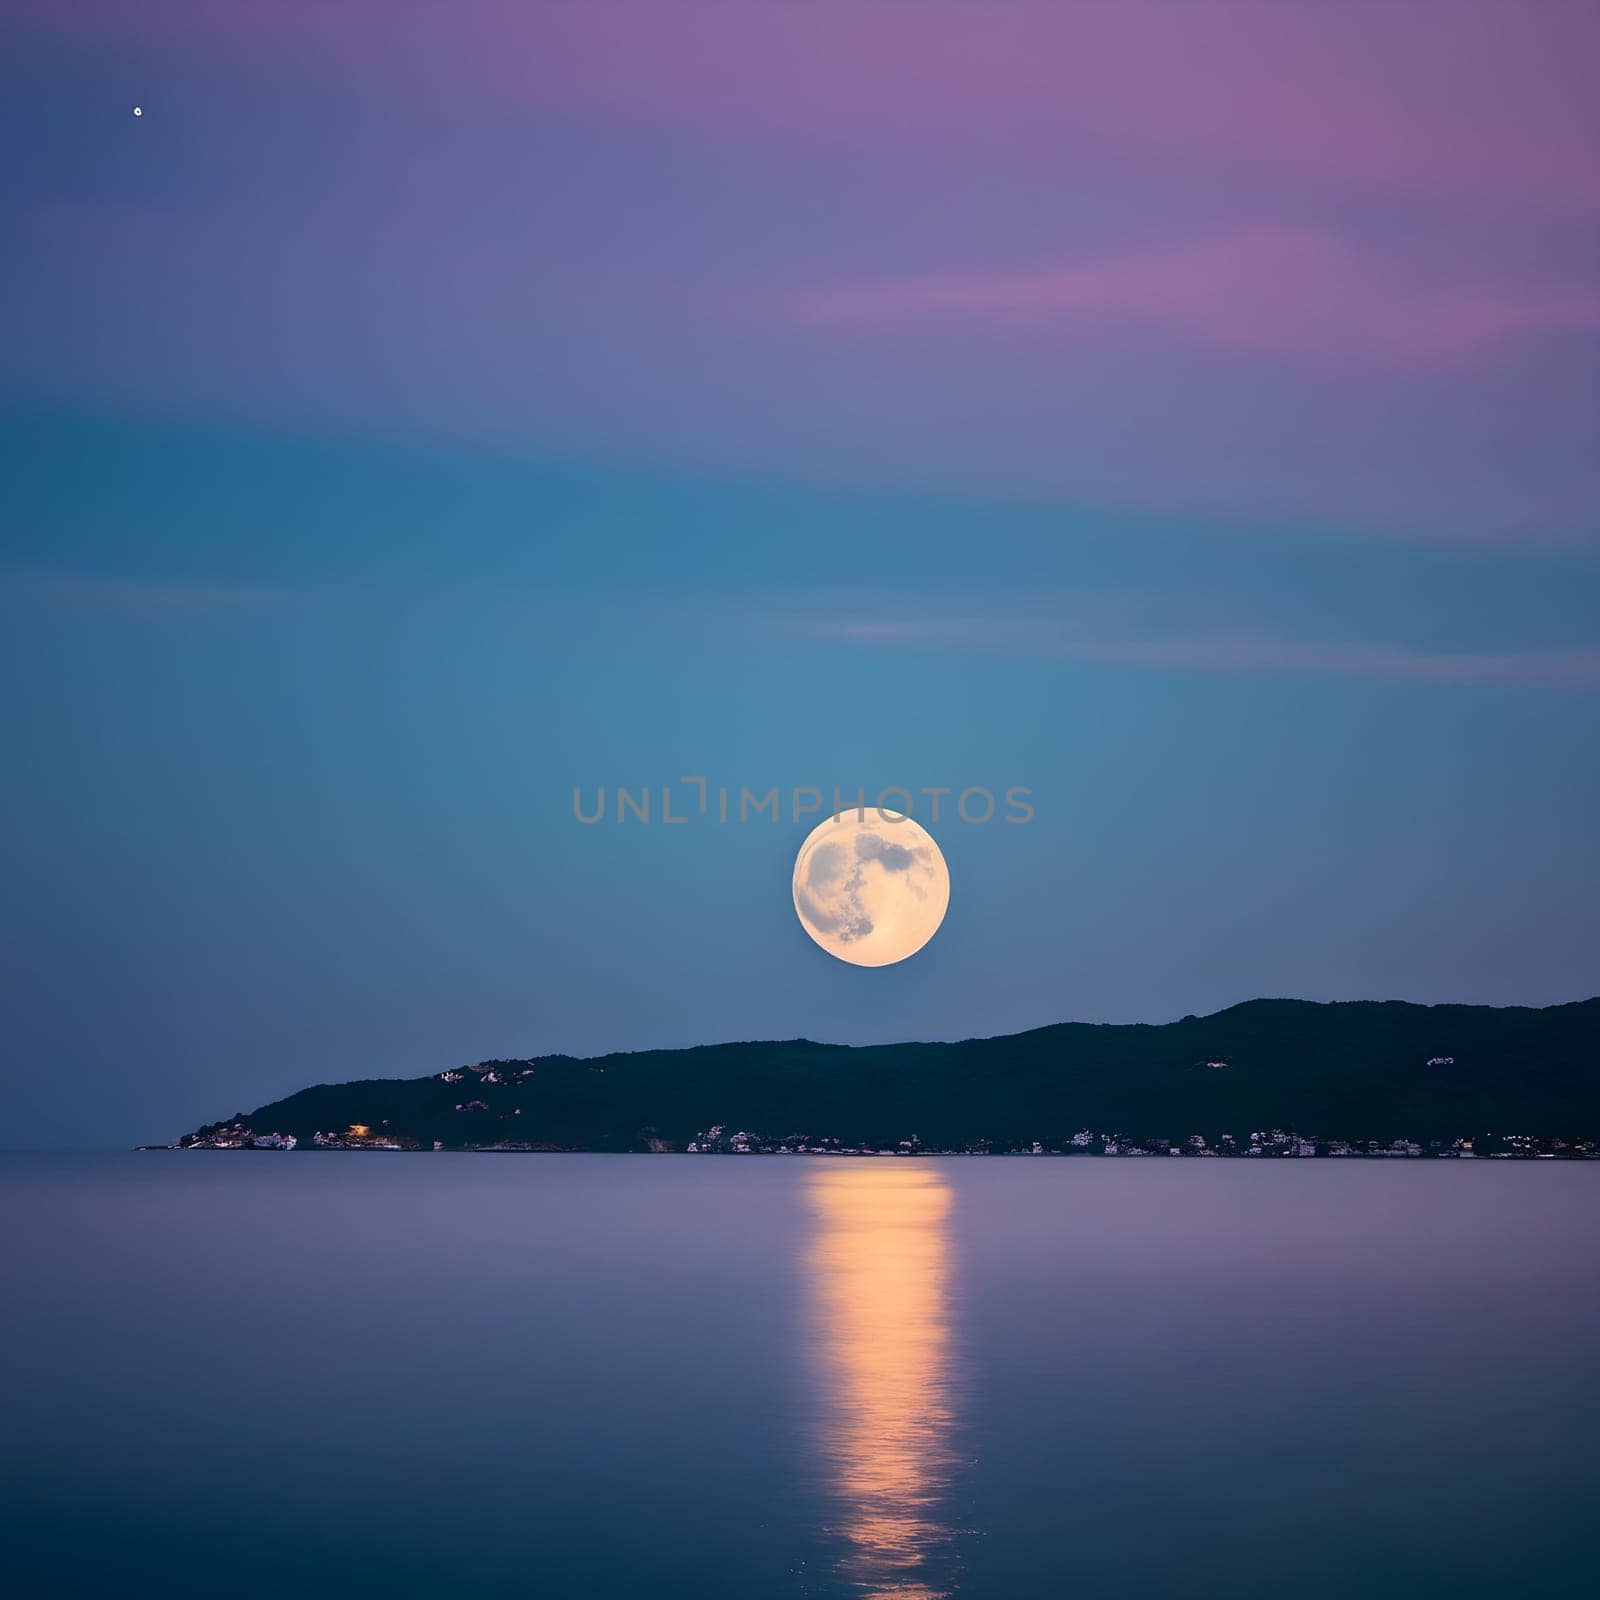 Moonlit Majesty: Exploring the Colorful Night Seascape under the Super Moon by Petrichor